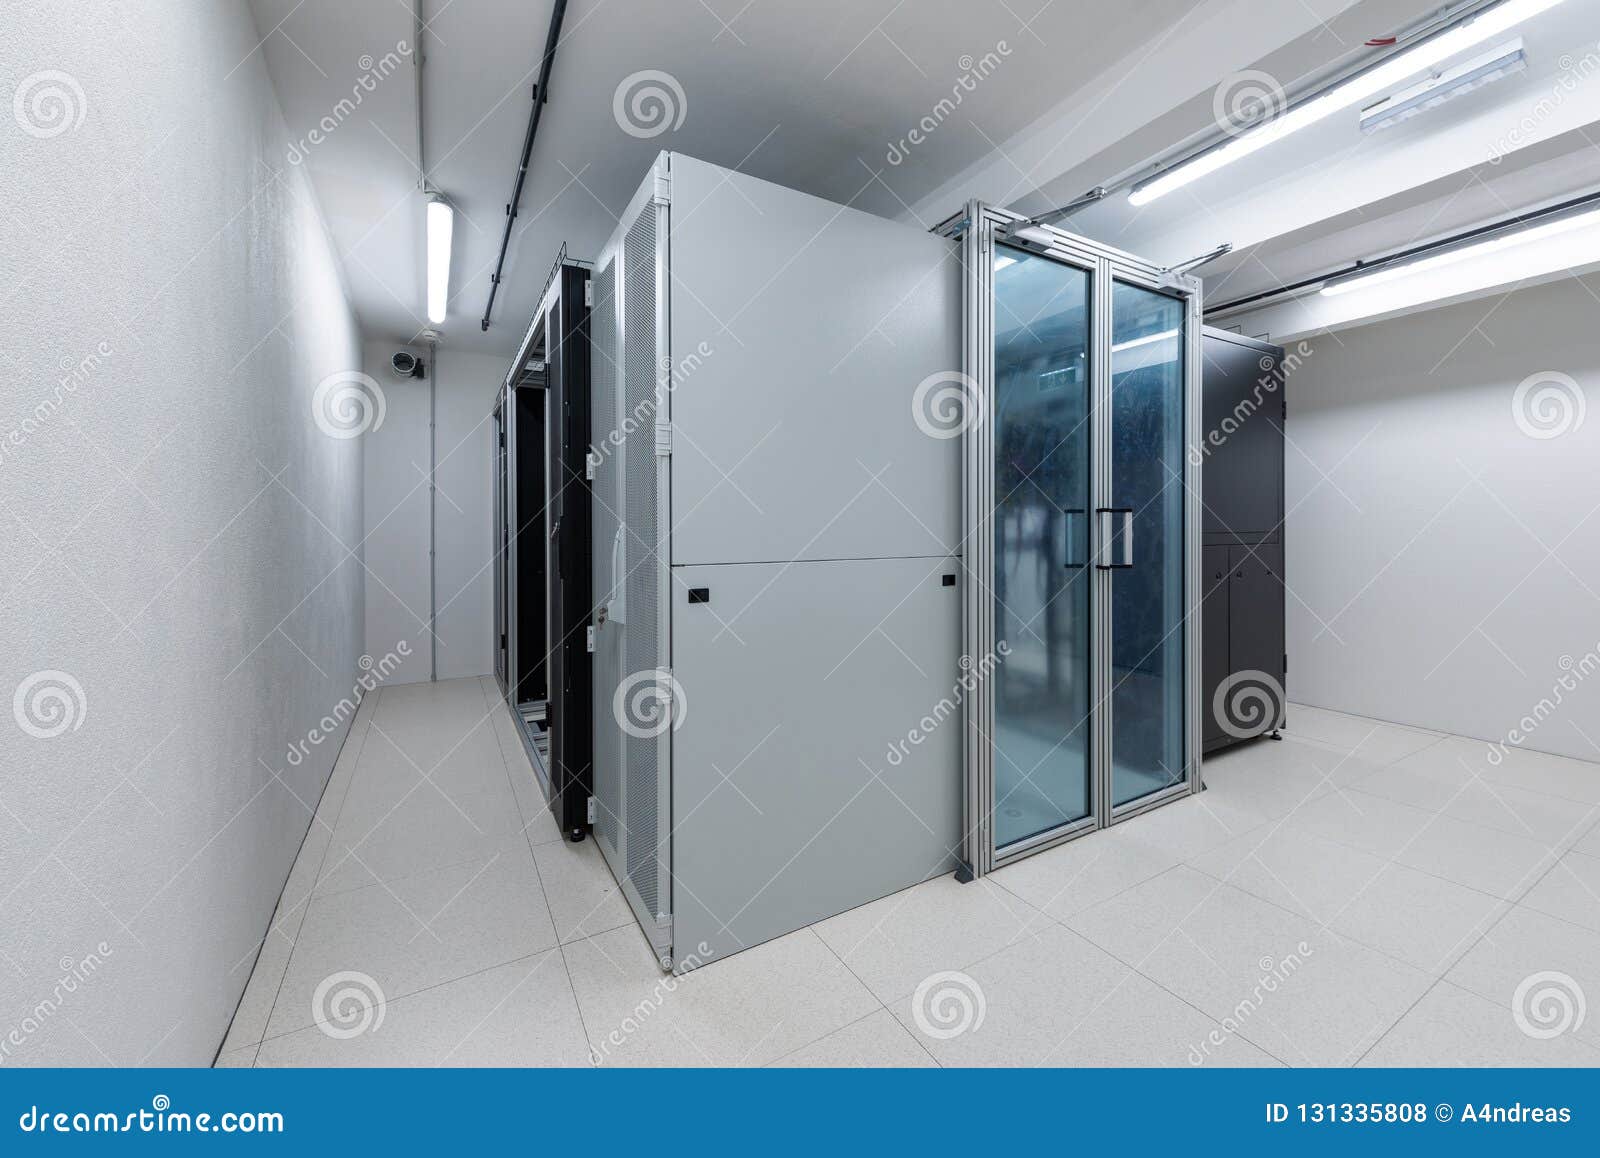 cold aisle containment and in-row cooling rack units of computer data center